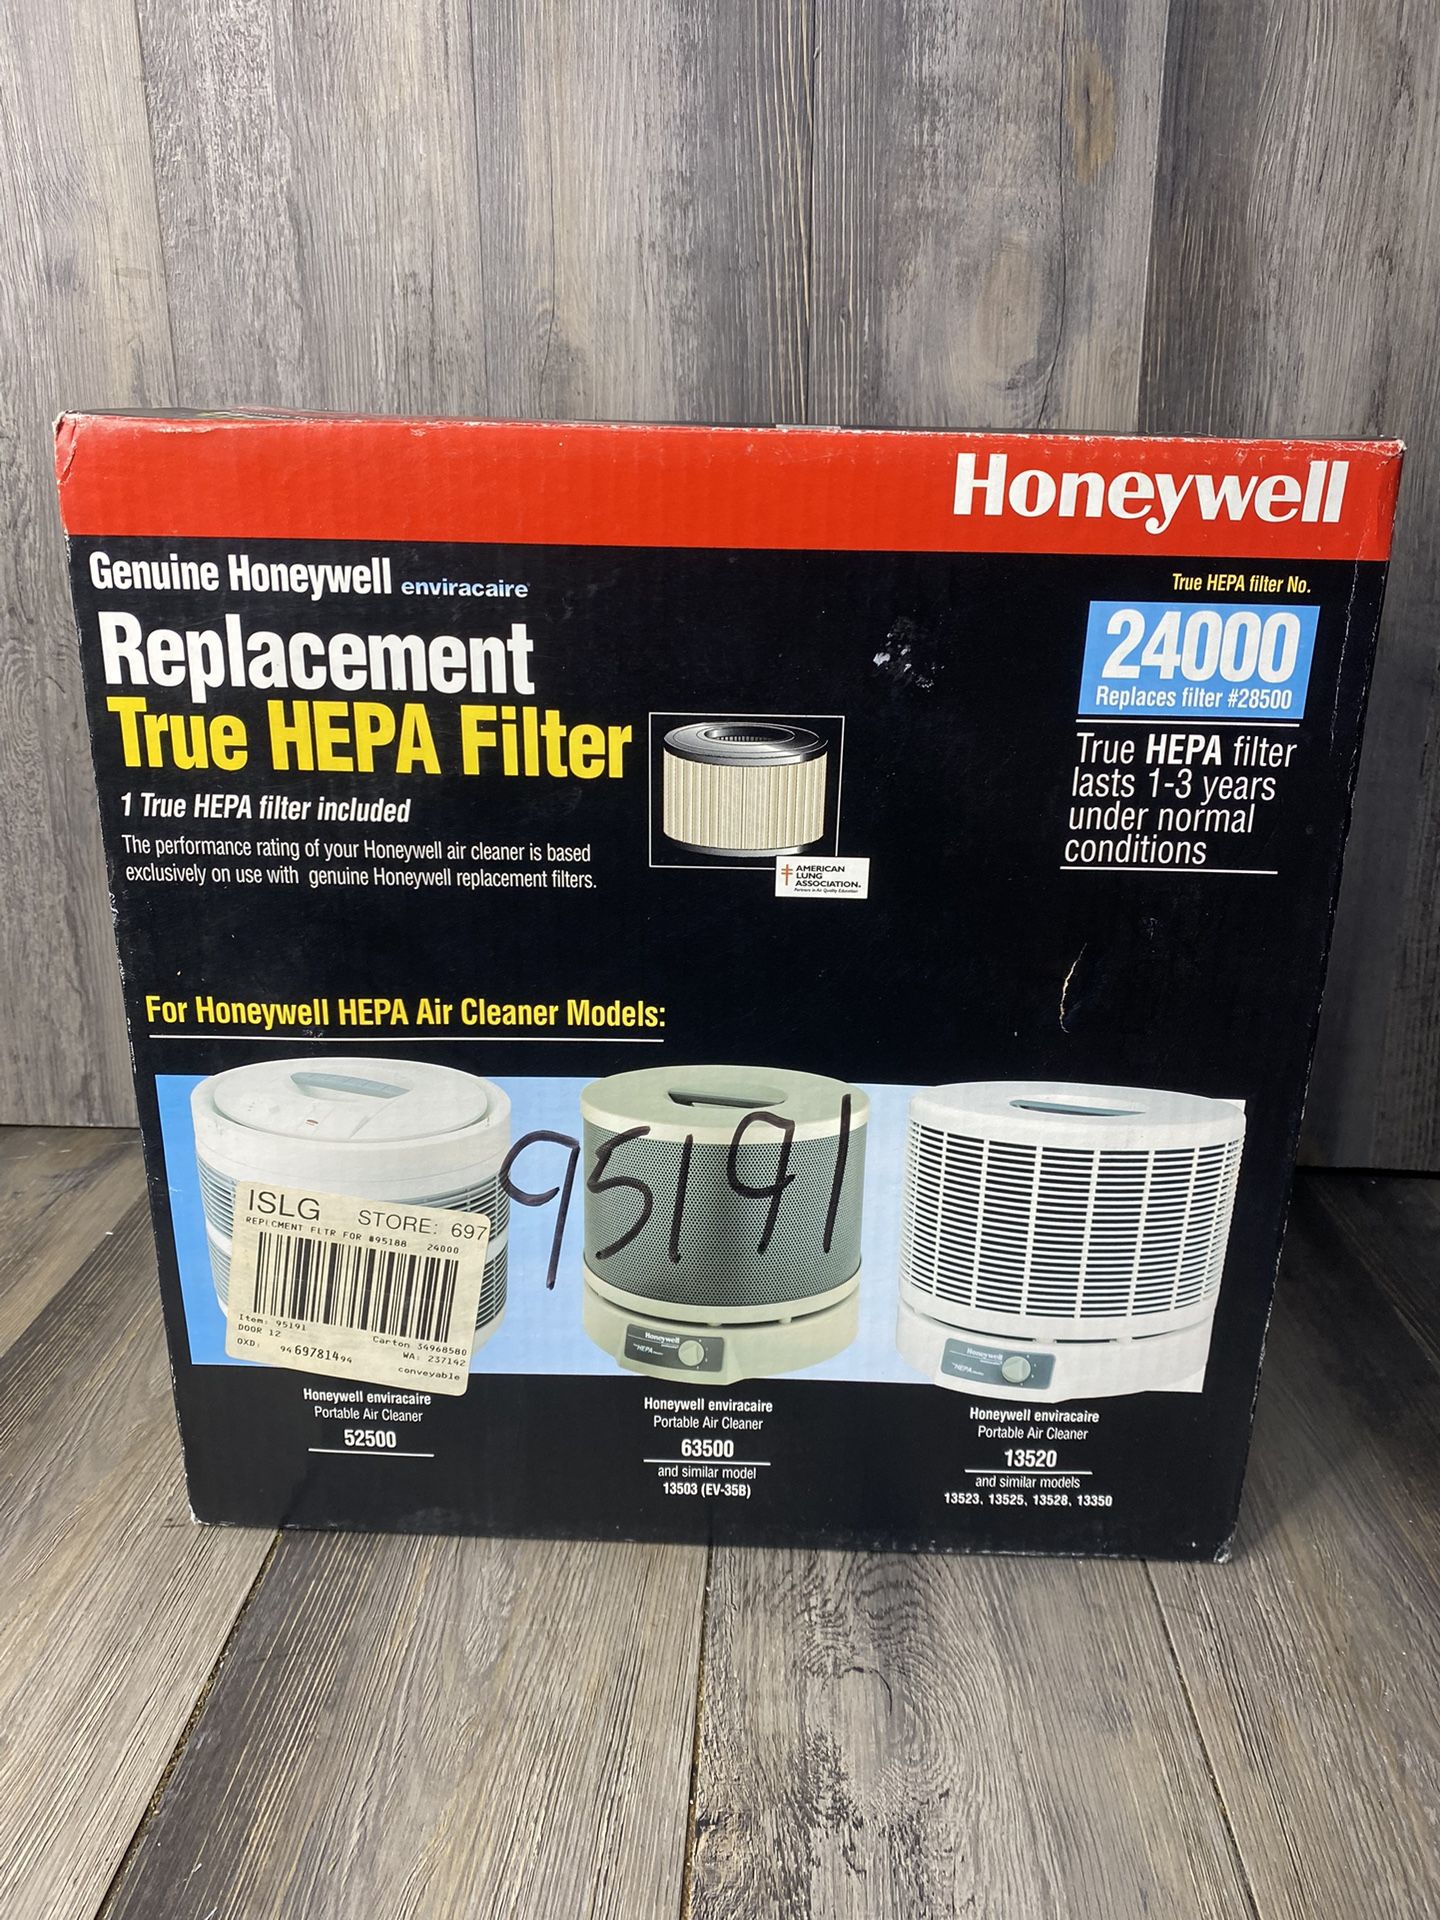 Honeywell Enviracaire Replacement True HEPA Filter 24000 Replaces #28500 Genuine